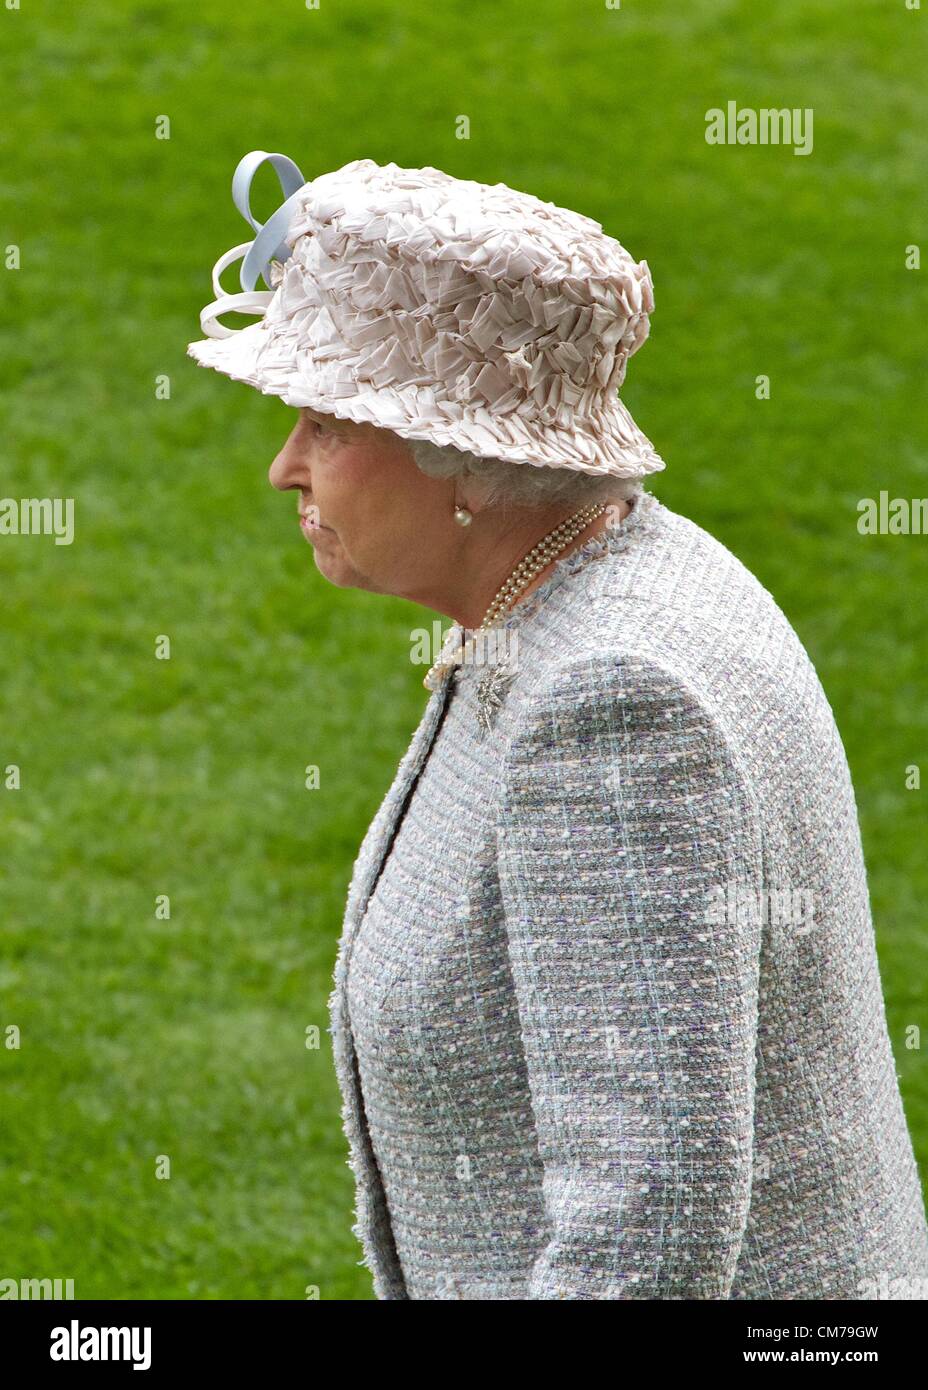 Ascot, UK. 20th October, 2012. Queen Elizabeth II in the parade ring at Ascot, after the Qipco Queen Eliabeth II Stakes Stock Photo